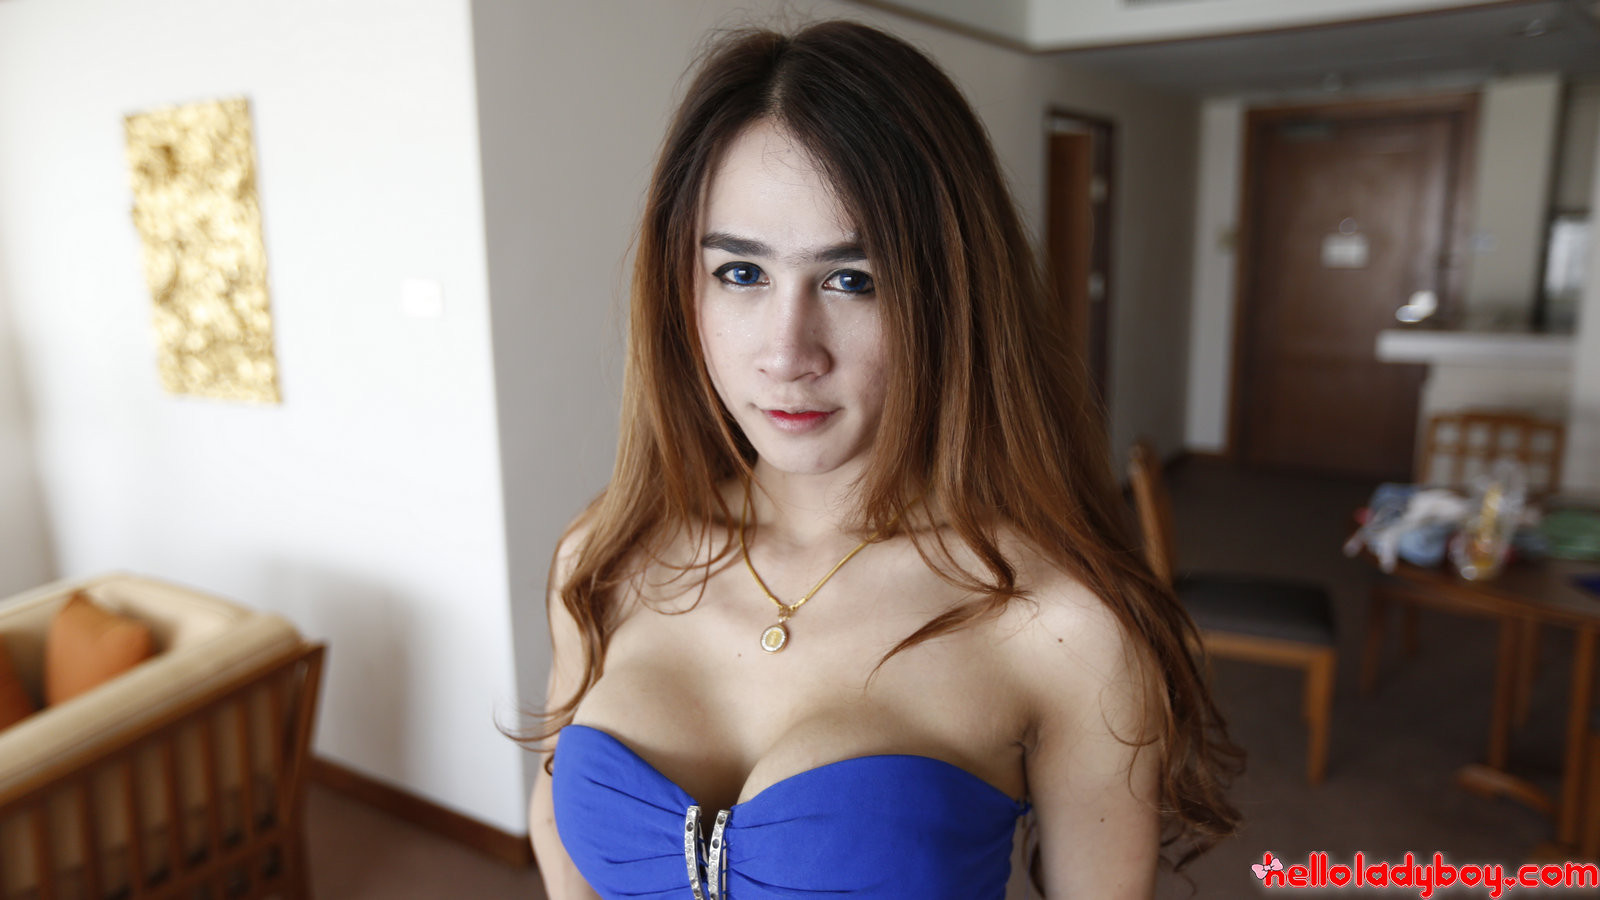 Thai ladyboy with enormous faux knockers and prolonged hair gets facial